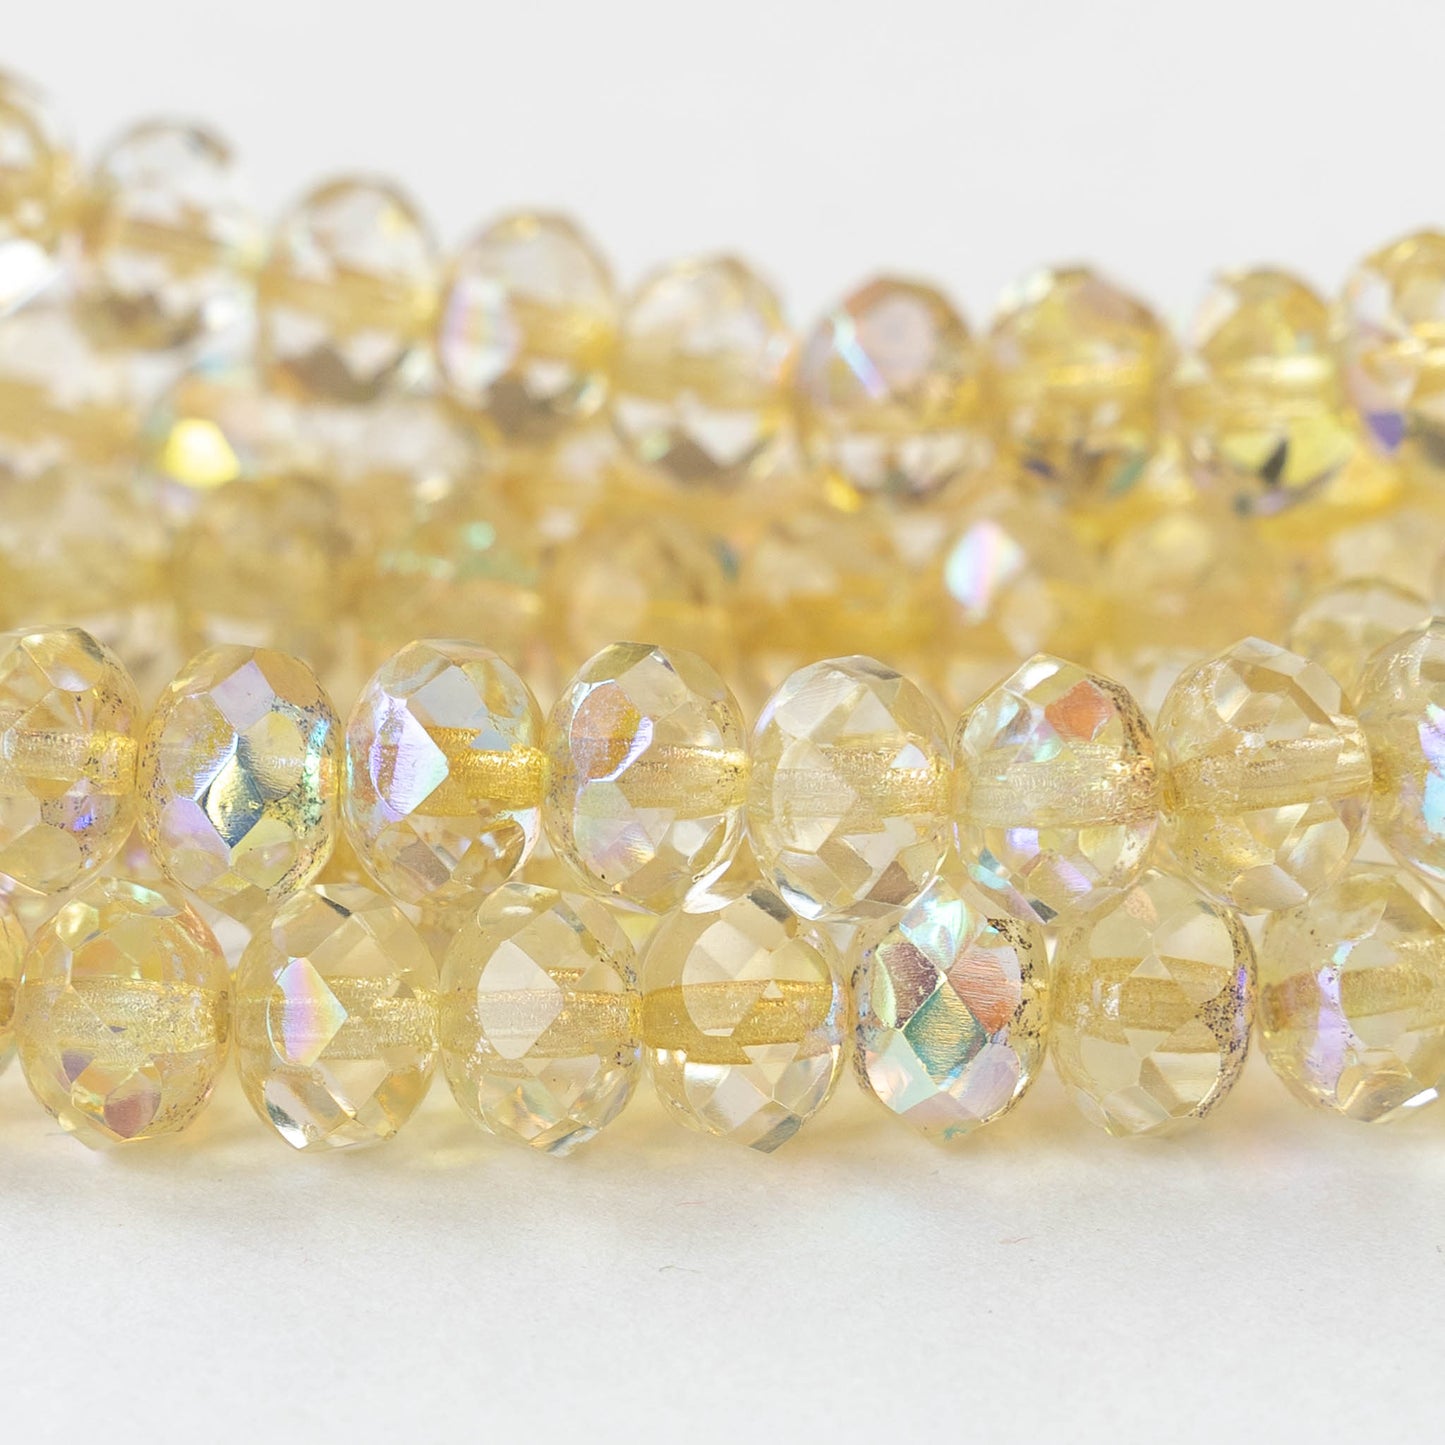 6x9mm Firepolished Rondelle Beads - Pale Yellow AB  with Antique Silver  - 25 Beads